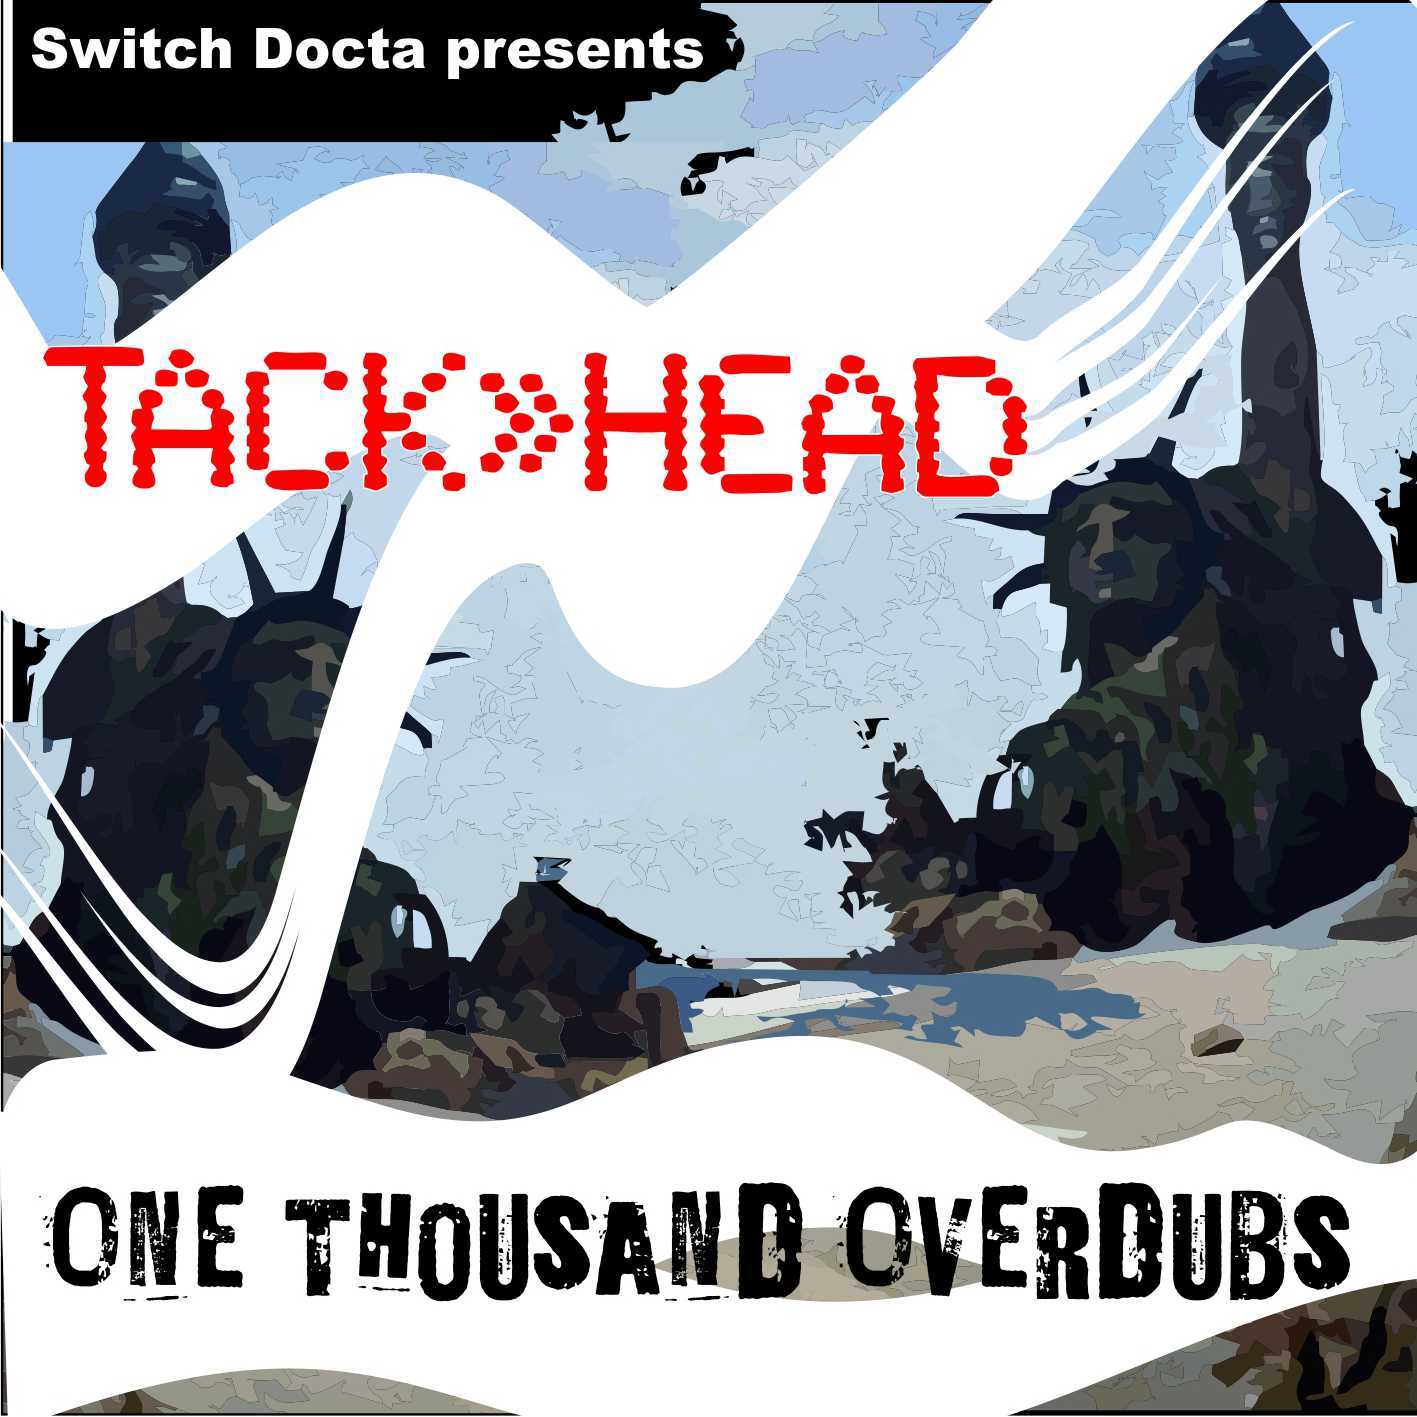 Tackhead_One_Thousend_Overdubs_Cover